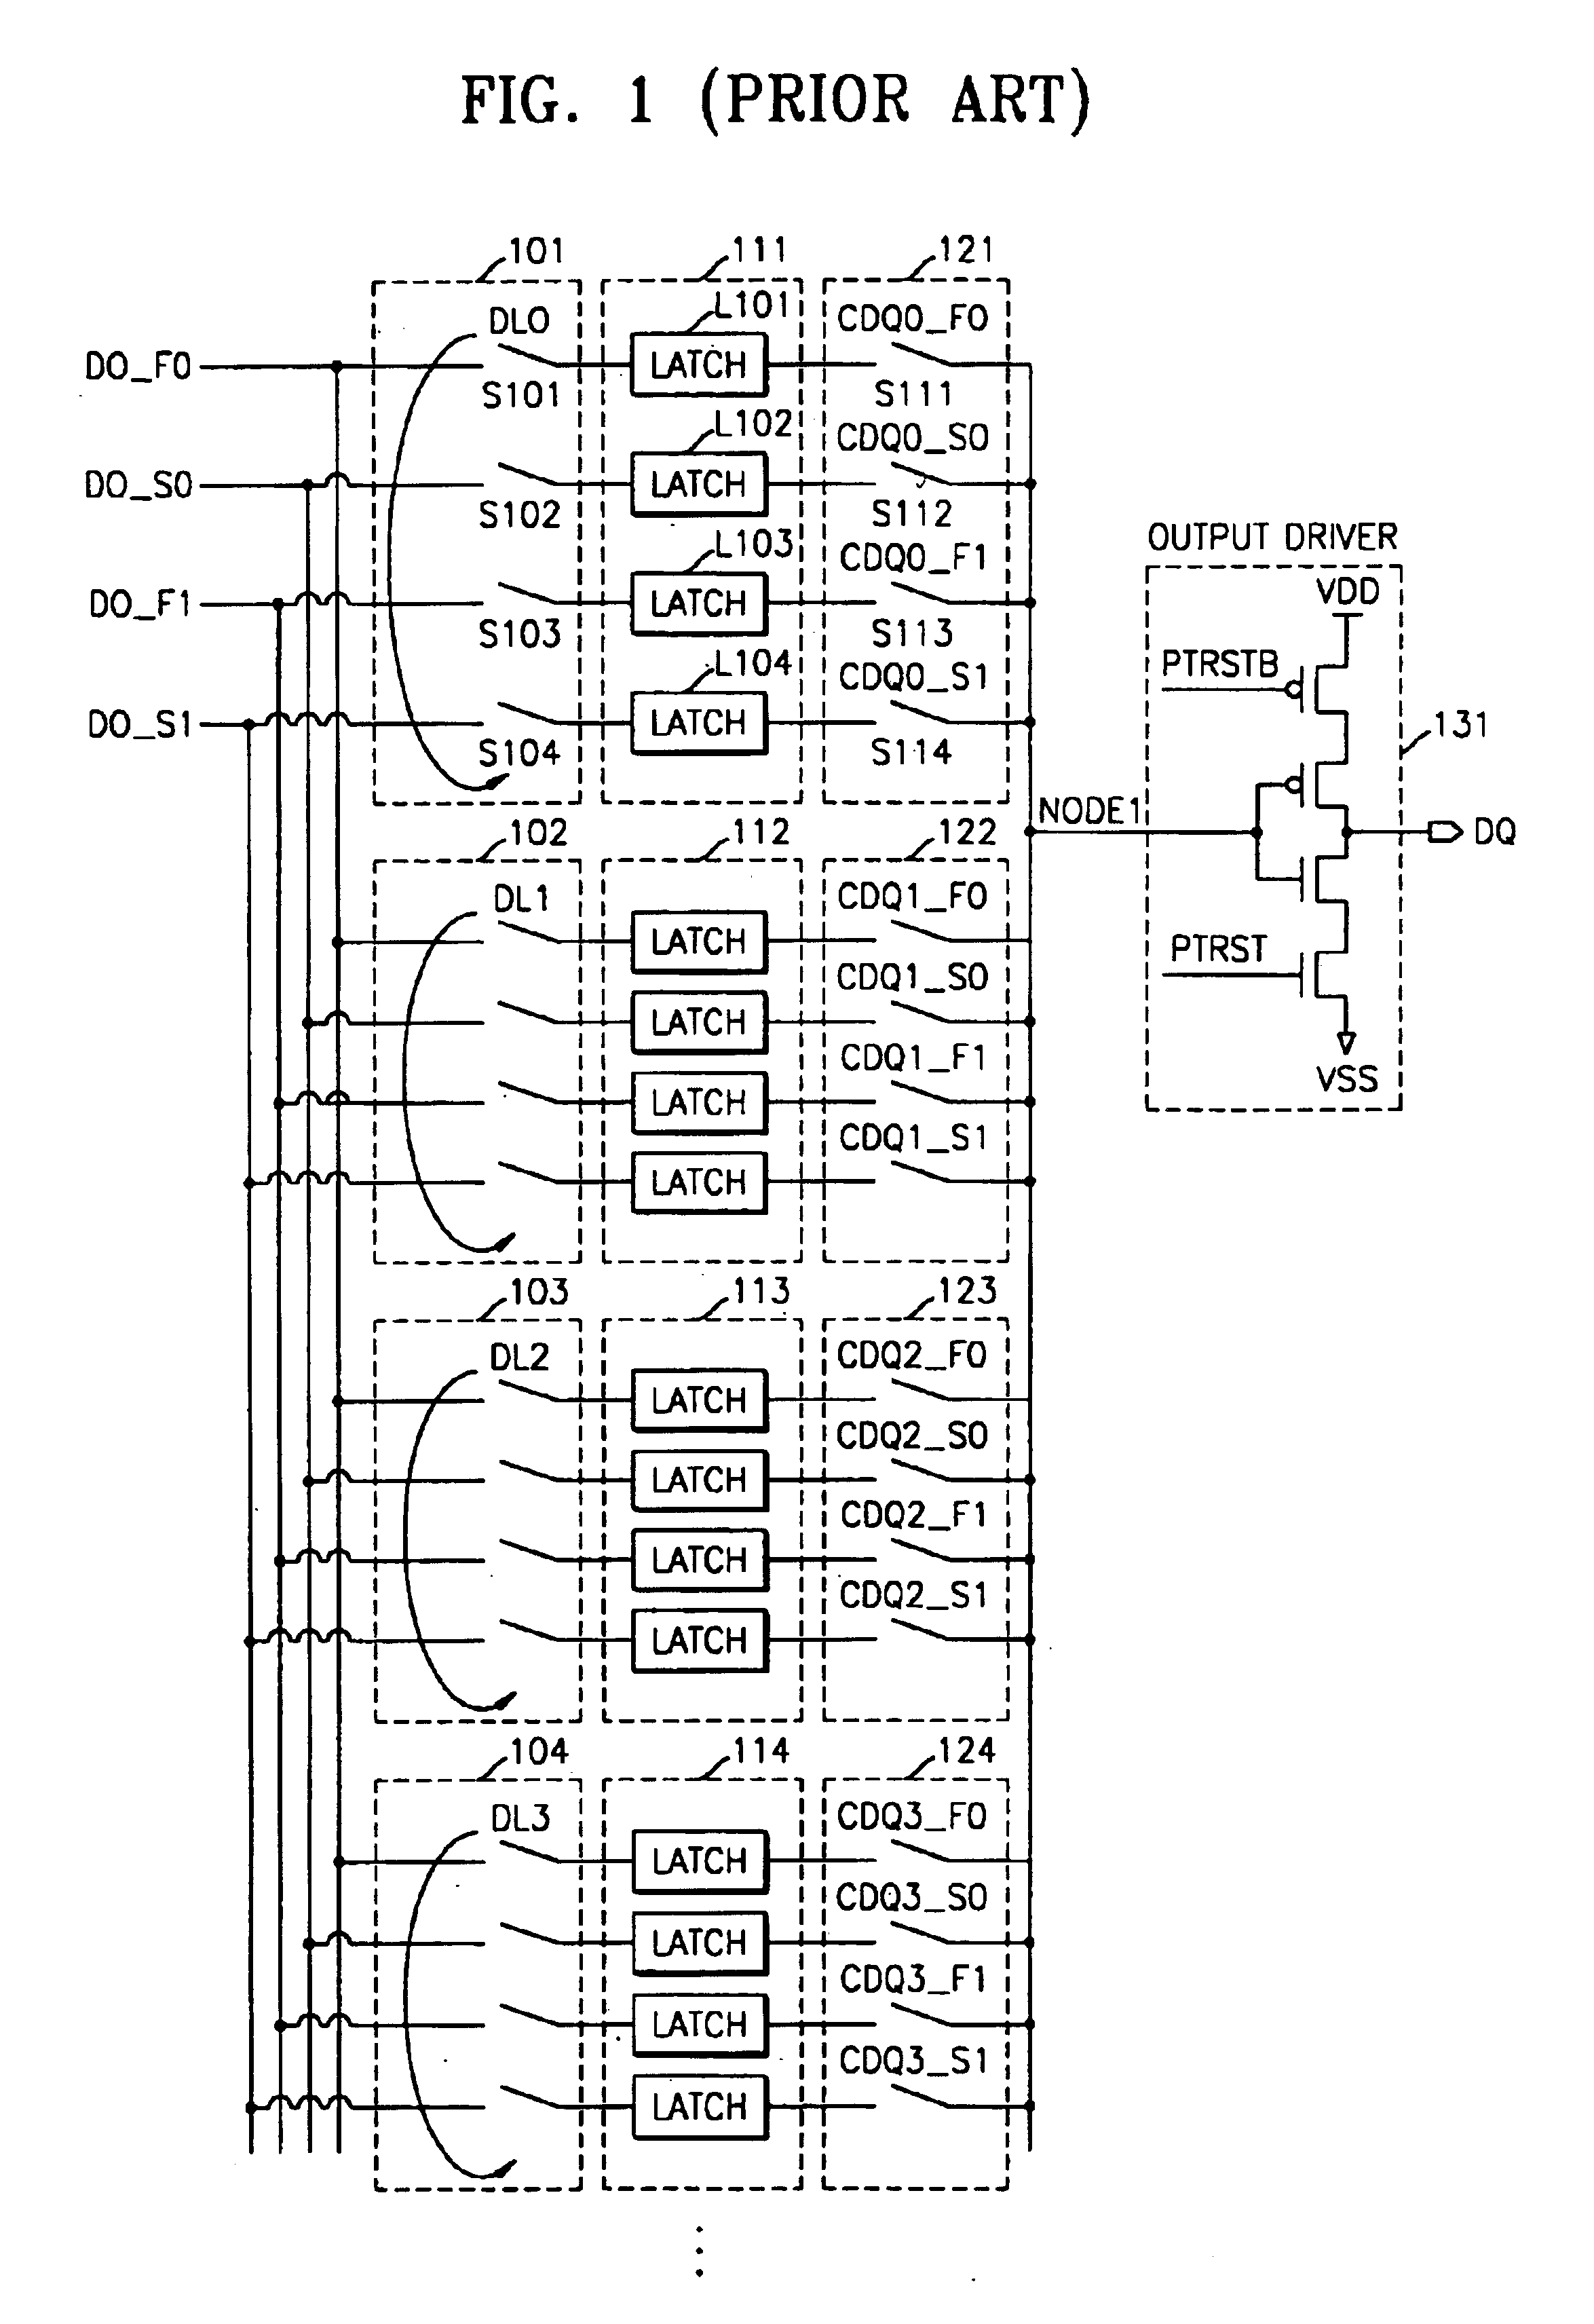 Multi-stage output multiplexing circuits and methods for double data rate synchronous memory devices